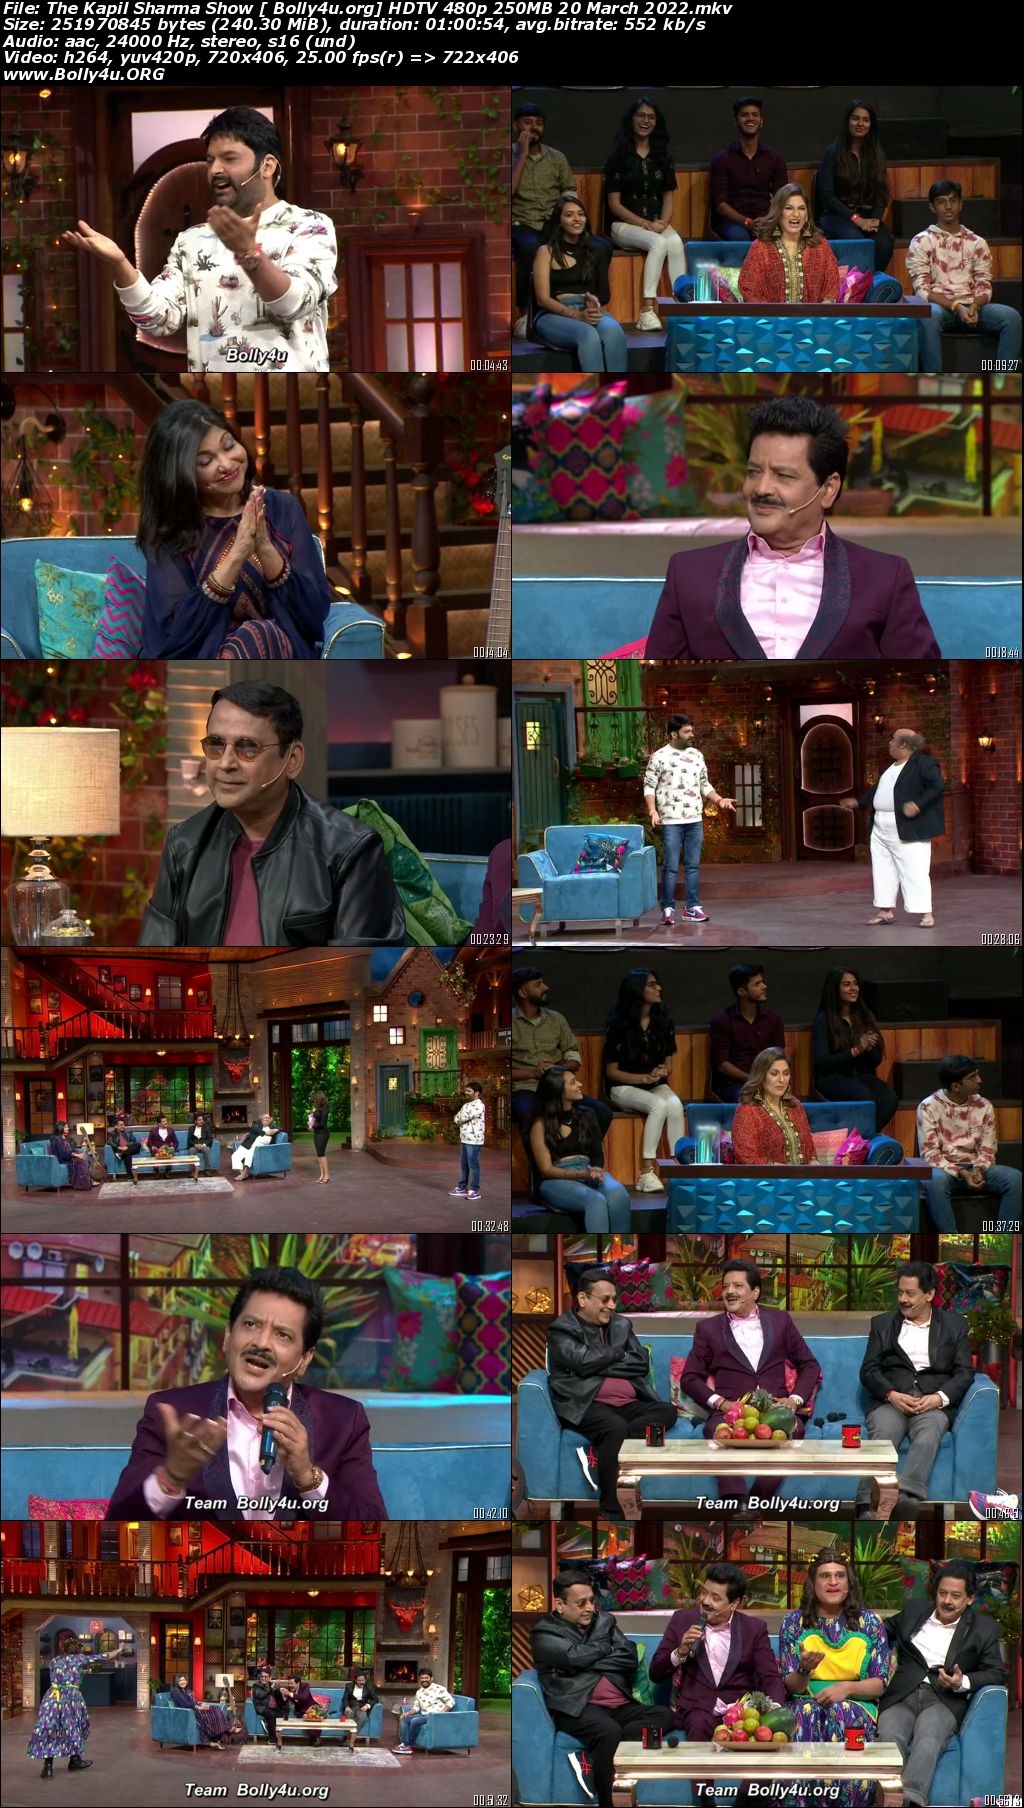 The Kapil Sharma Show HDTV 480p 250MB 20 March 2022 Download